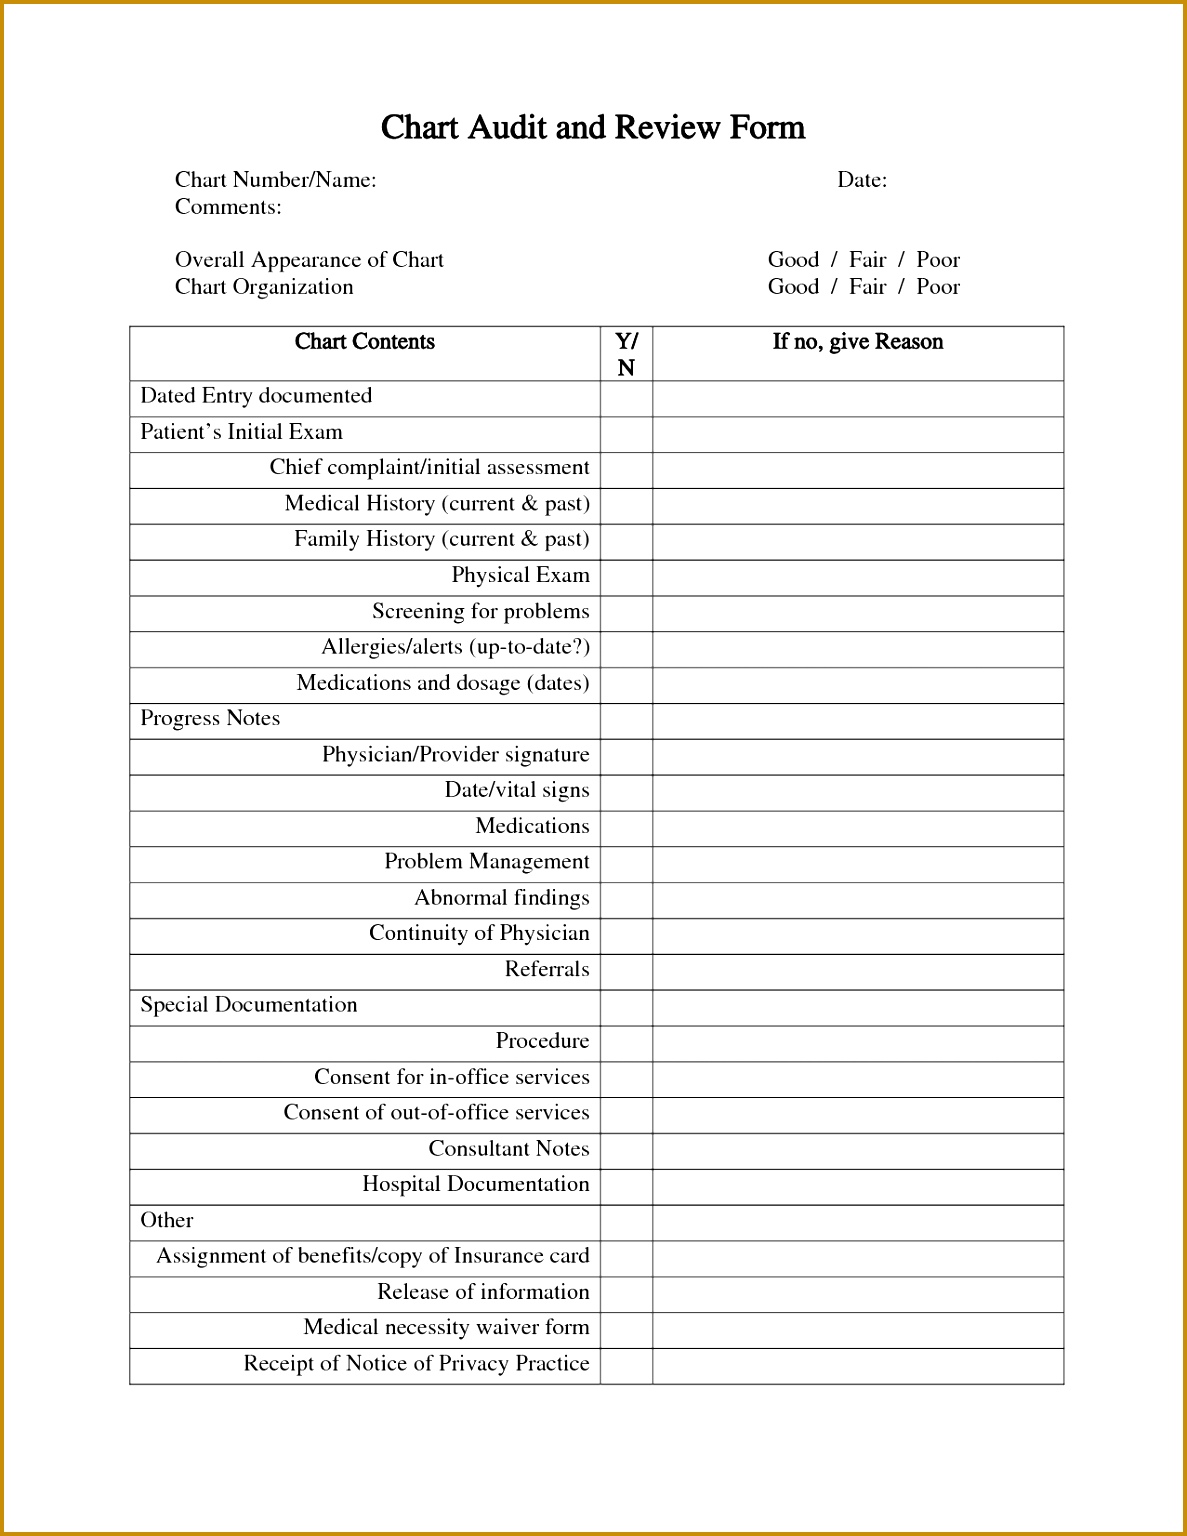 Audit Form Template Example Mughals 5 Medical Chart Template Memo Formats Audit And Review Form Pdf By Zyq Address Word Example Agenda Templates For 11871536